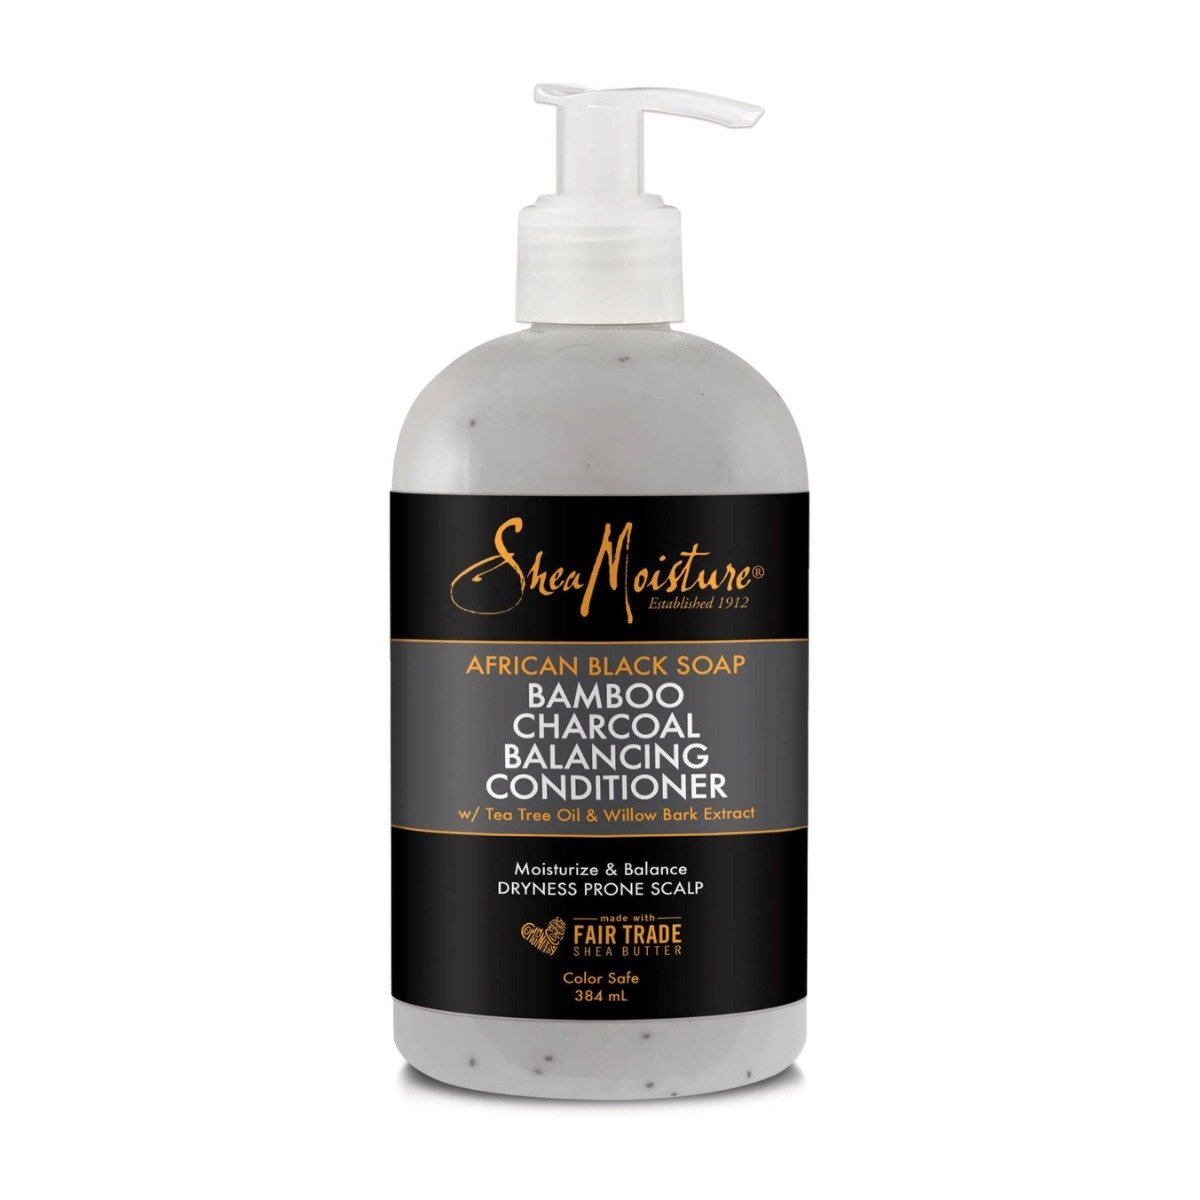 Shea Moisture African Black Soap Bamboo Charcoal Balancing Conditioner - 384ml - Bloom Pharmacy